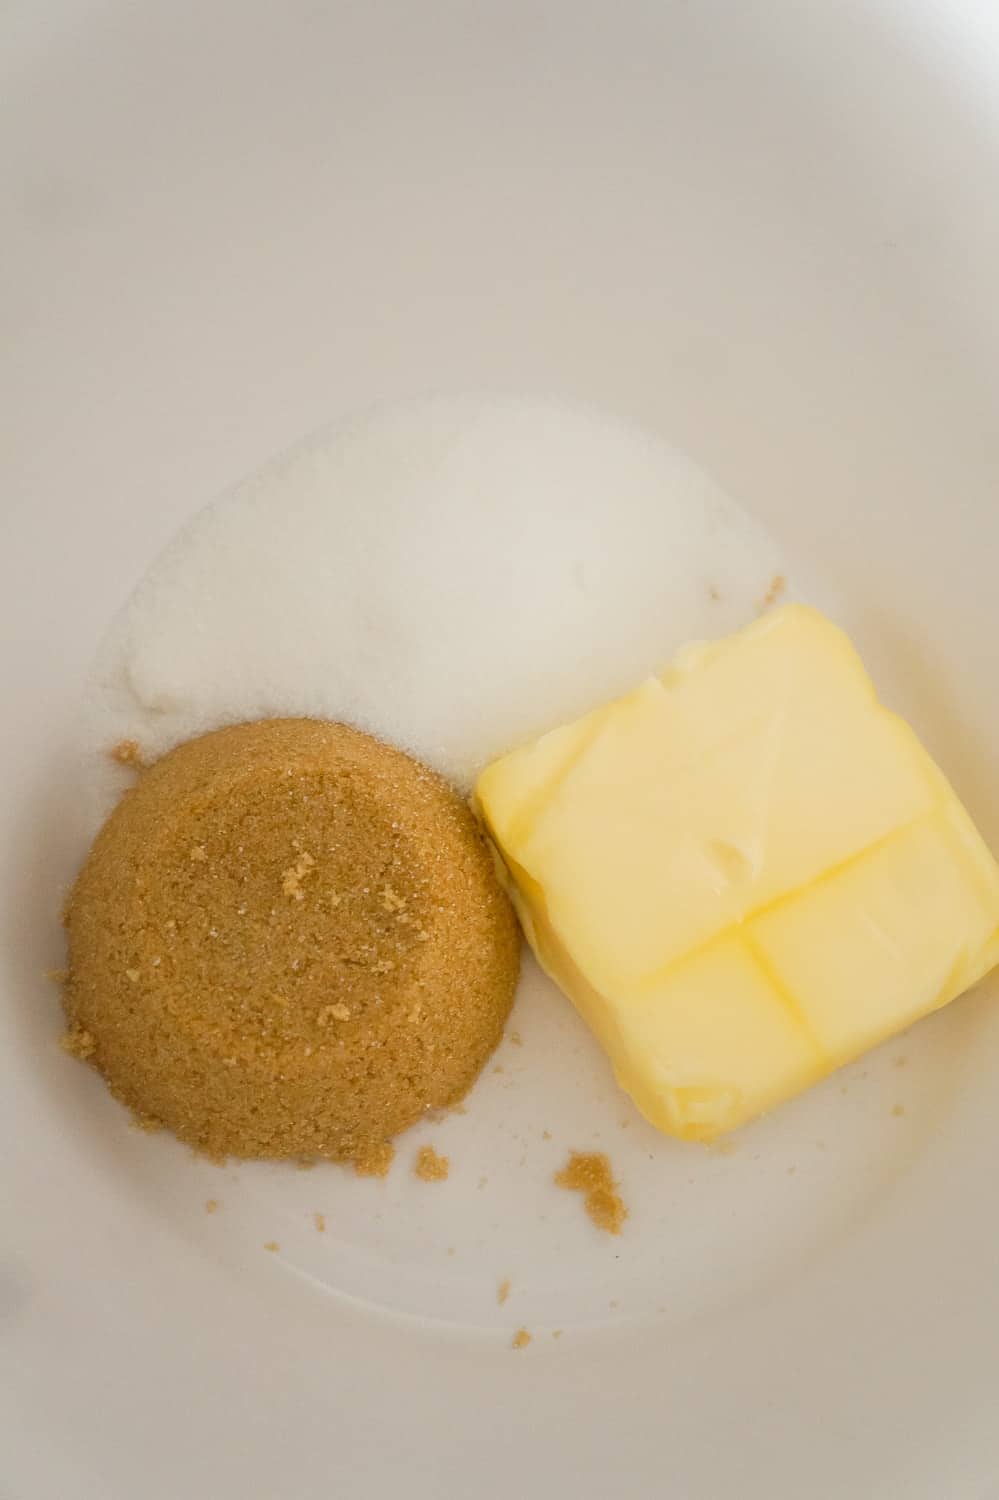 brown sugar, granulated sugar and butter in a mixing bowl